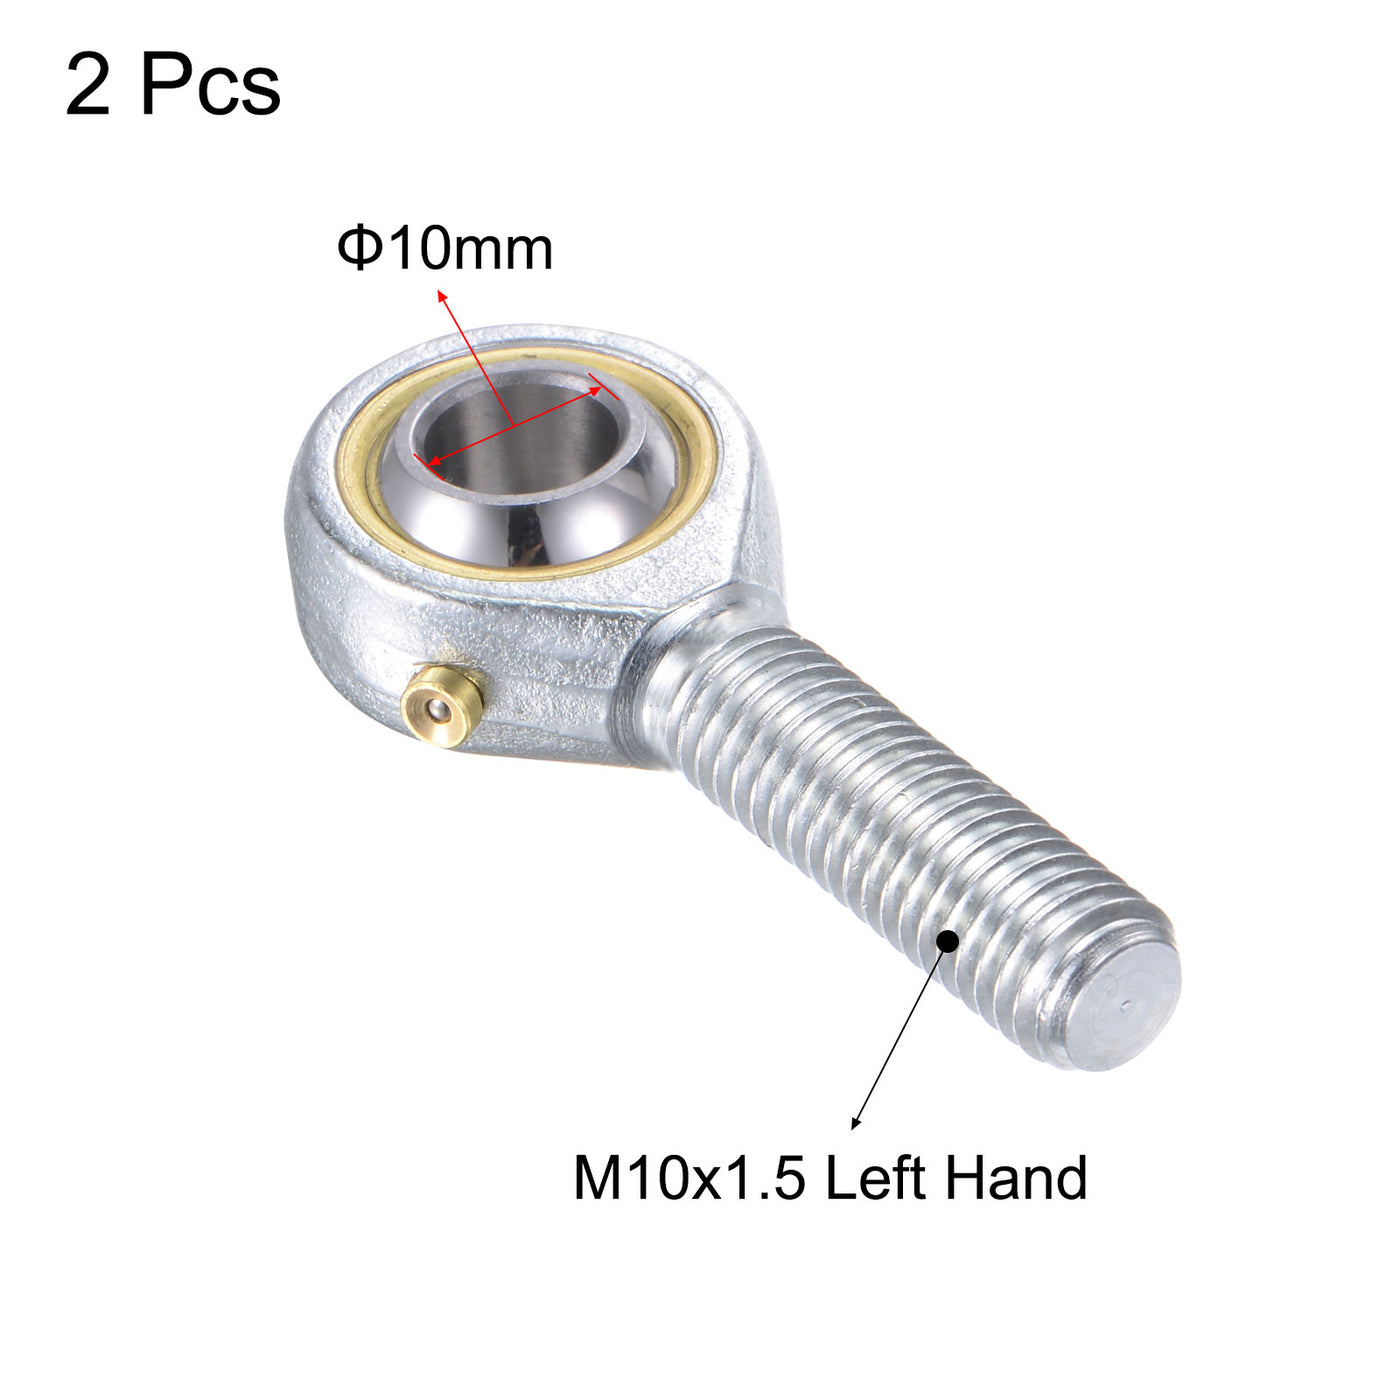 uxcell Uxcell 2pcs POS10 Rod End Bearing 10mm Bore Self-lubricated M10 Left Hand Male Thread